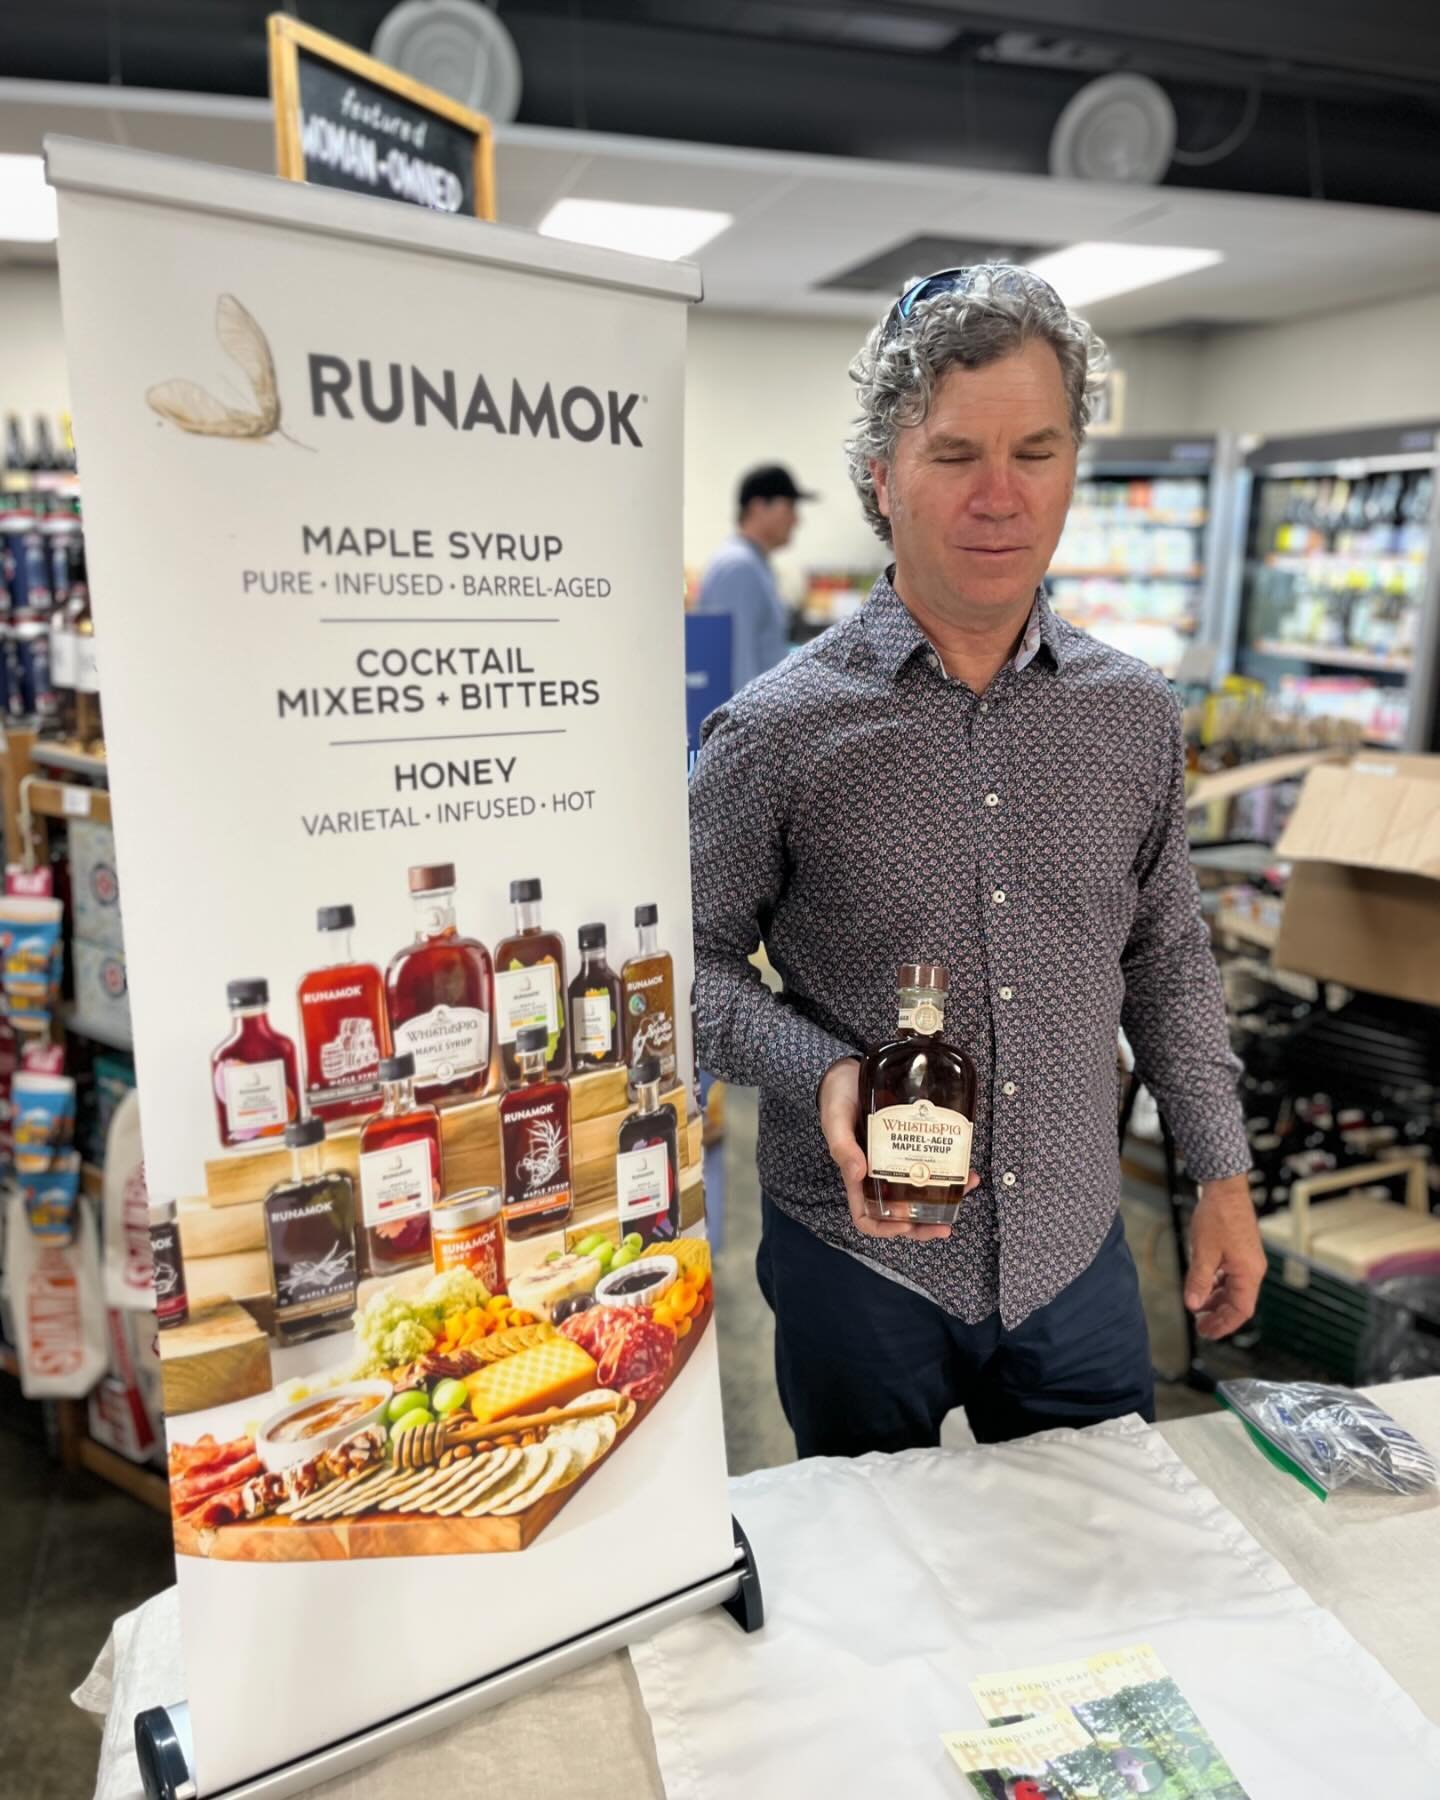 @runamokmaple is here all the way from Vermont, sampling their maple syrup! Come try some of the most delicious maple syrup in the universe!